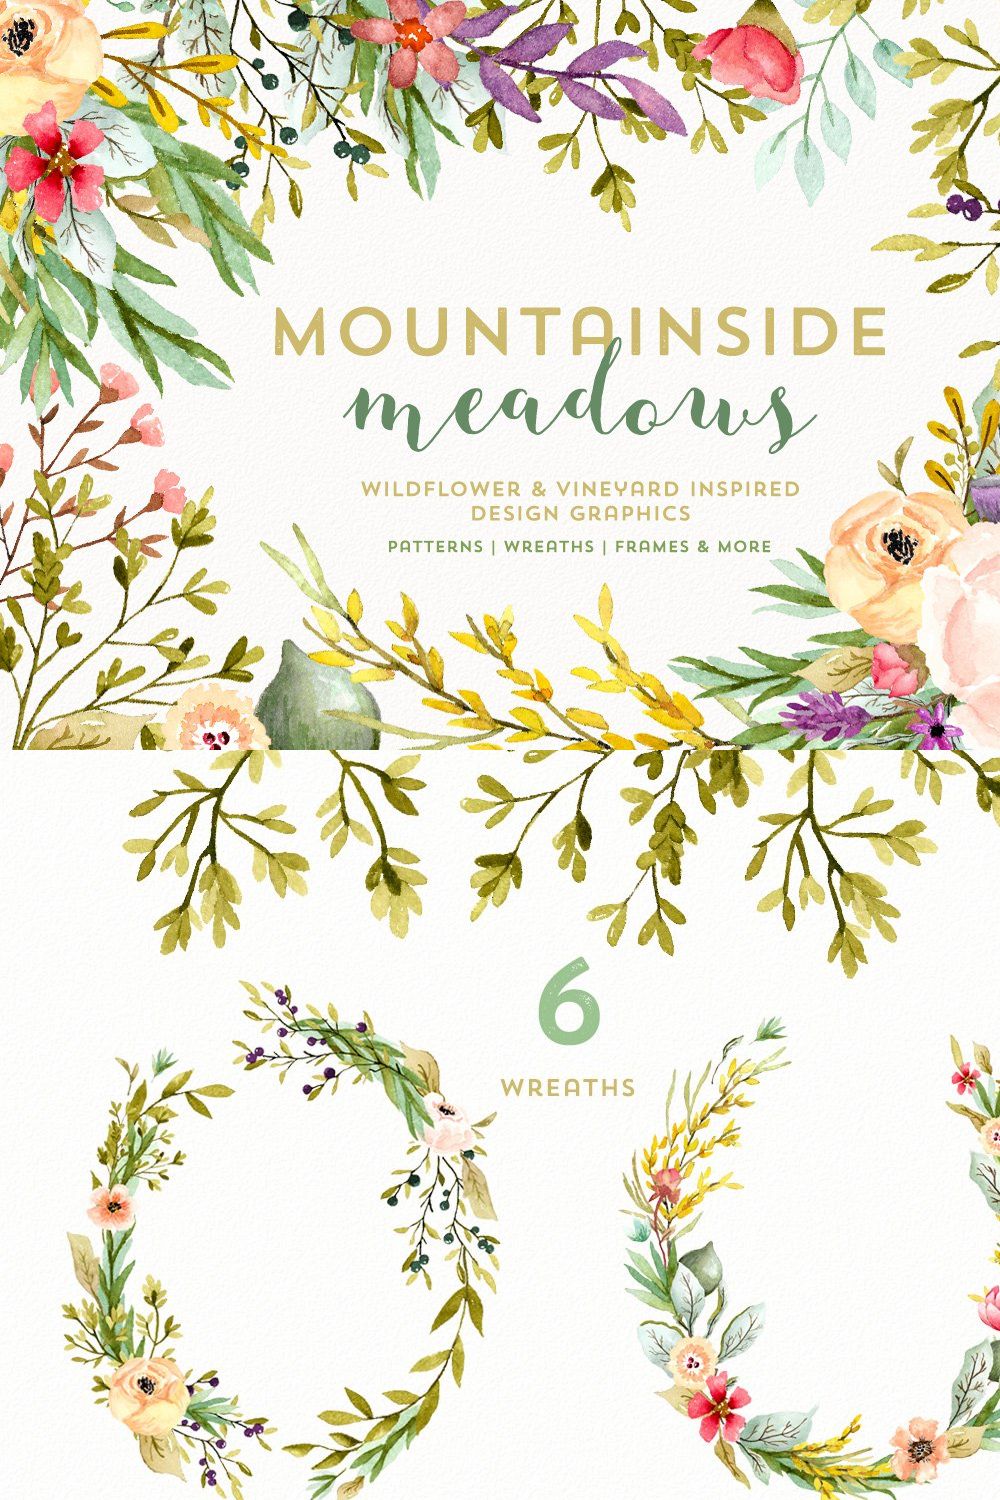 Mountainside Meadows Wildflowers pinterest preview image.